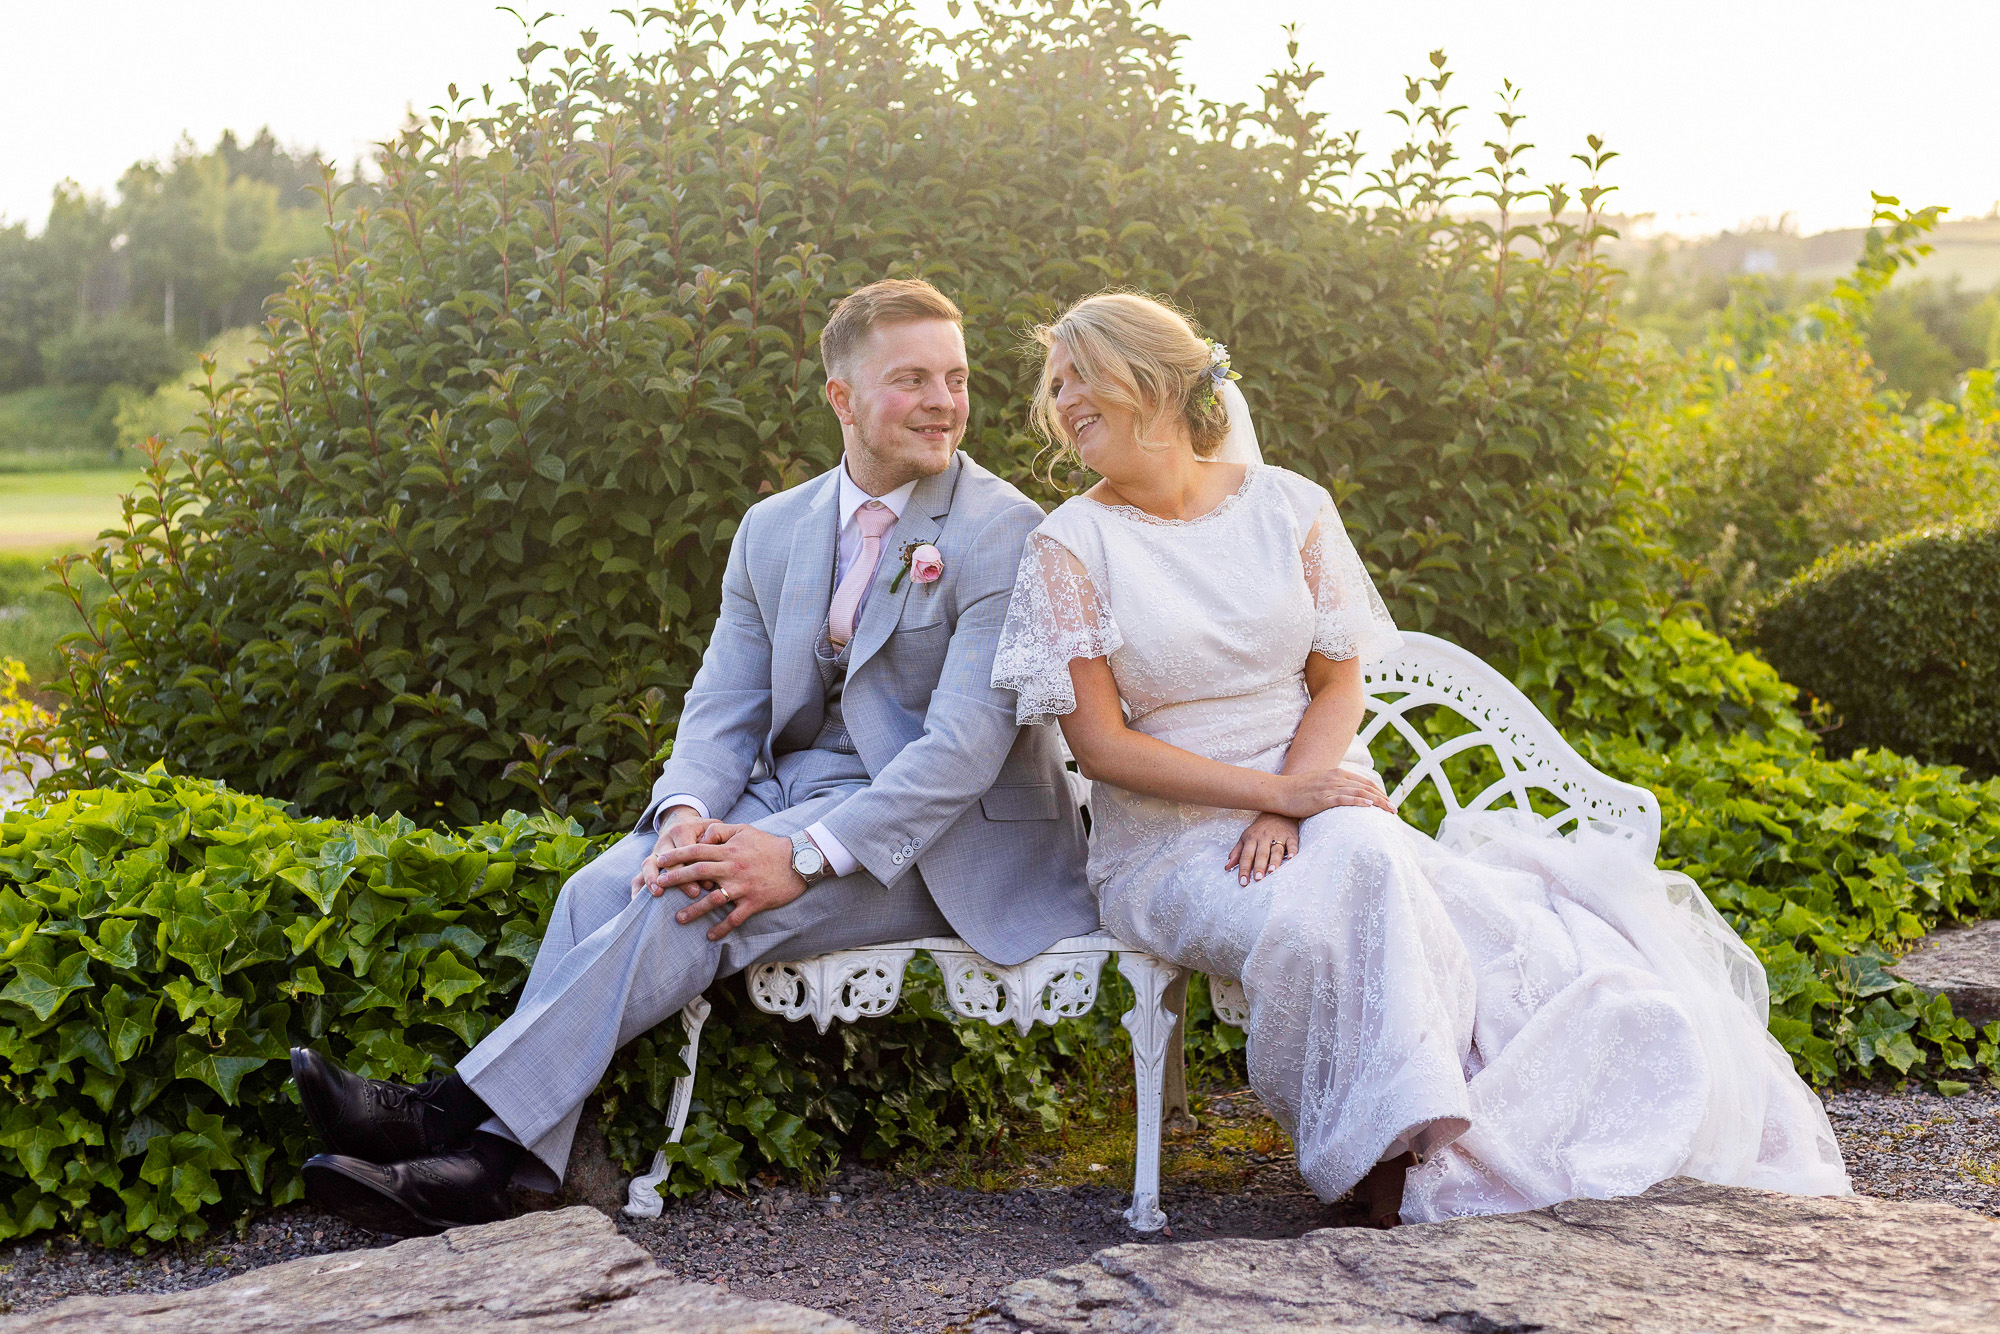 A colour image of a couple who are sitting on a white metal bench, in the centre of the image after having been married. He is on the left wearing a blue suit, she is wearing a white long wedding dress, the sun is casting a warm glow around the green trees and bushes behind them. Wedding photographer Aberdeen, Picture by Scott Cameron Baxter.